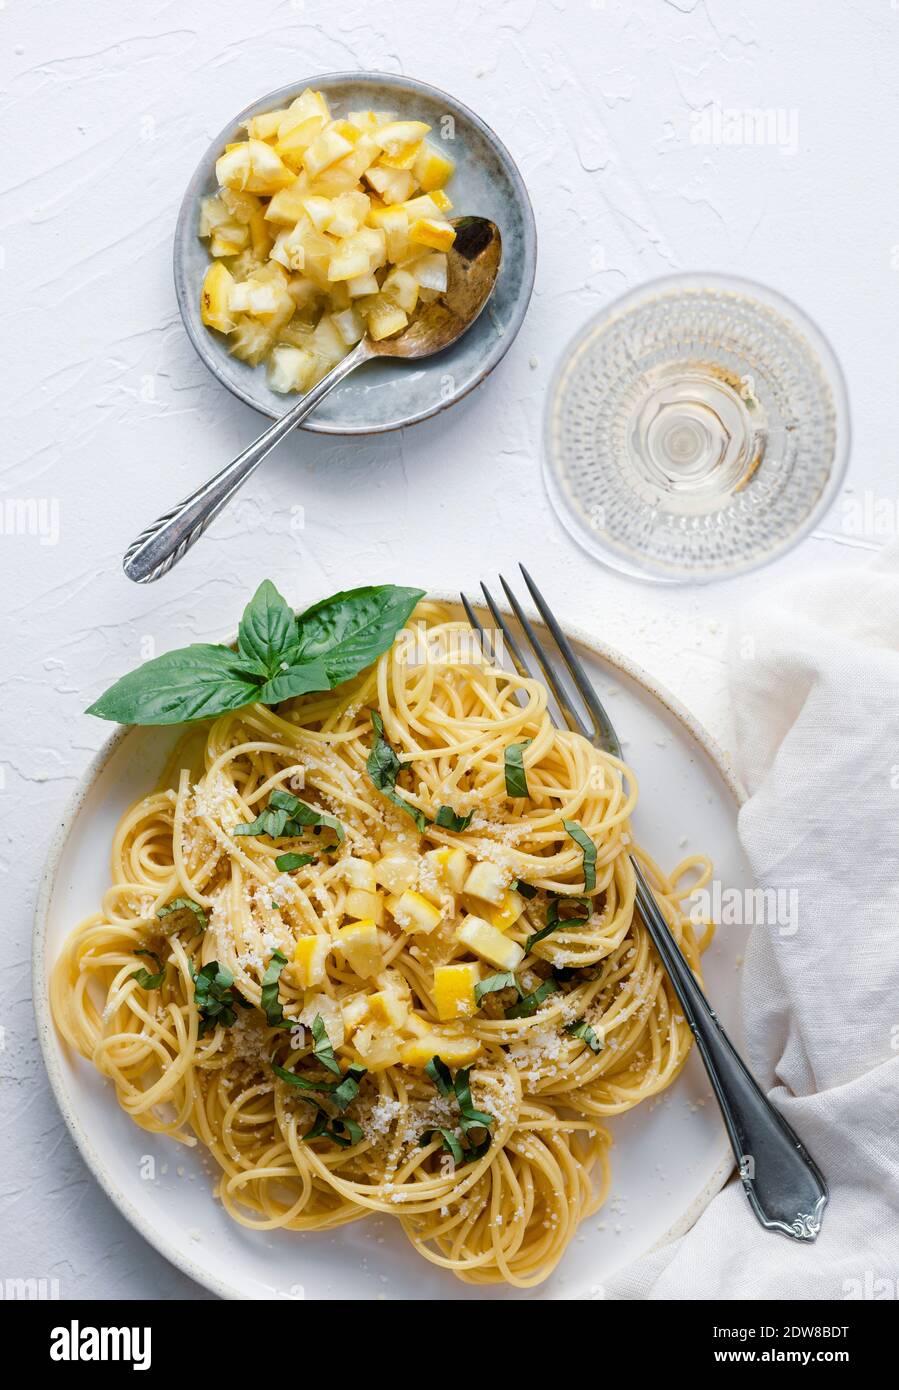 Pasta with preserved lemons Stock Photo